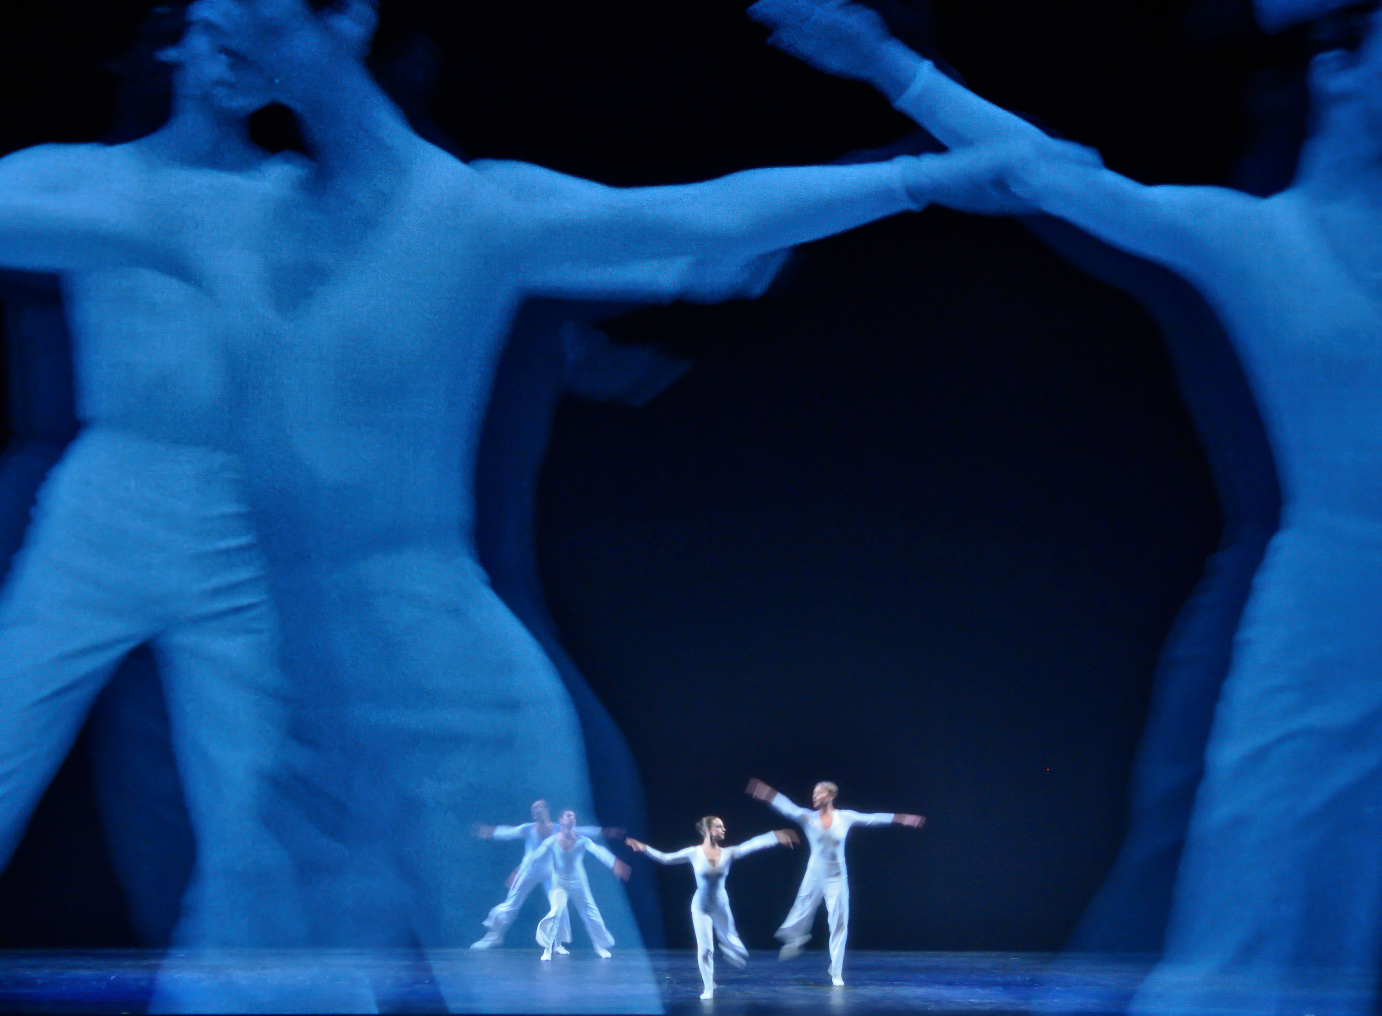 Four dancers cavort in front of dancers on film. Everyone is dressed in white pants and long-sleeved tops.